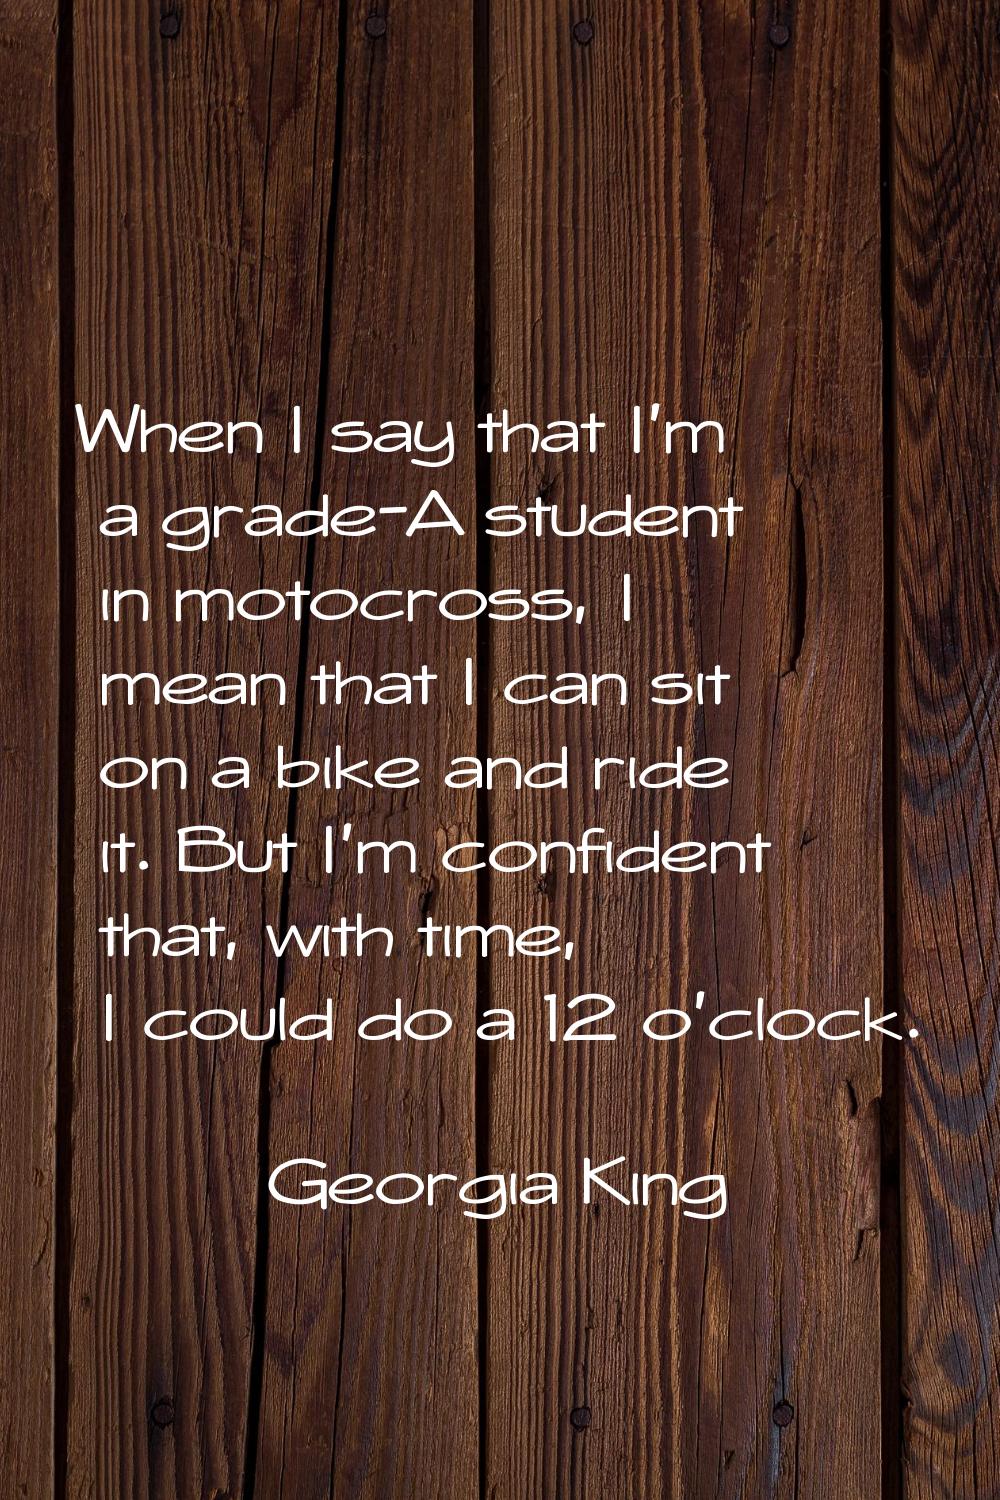 When I say that I'm a grade-A student in motocross, I mean that I can sit on a bike and ride it. Bu